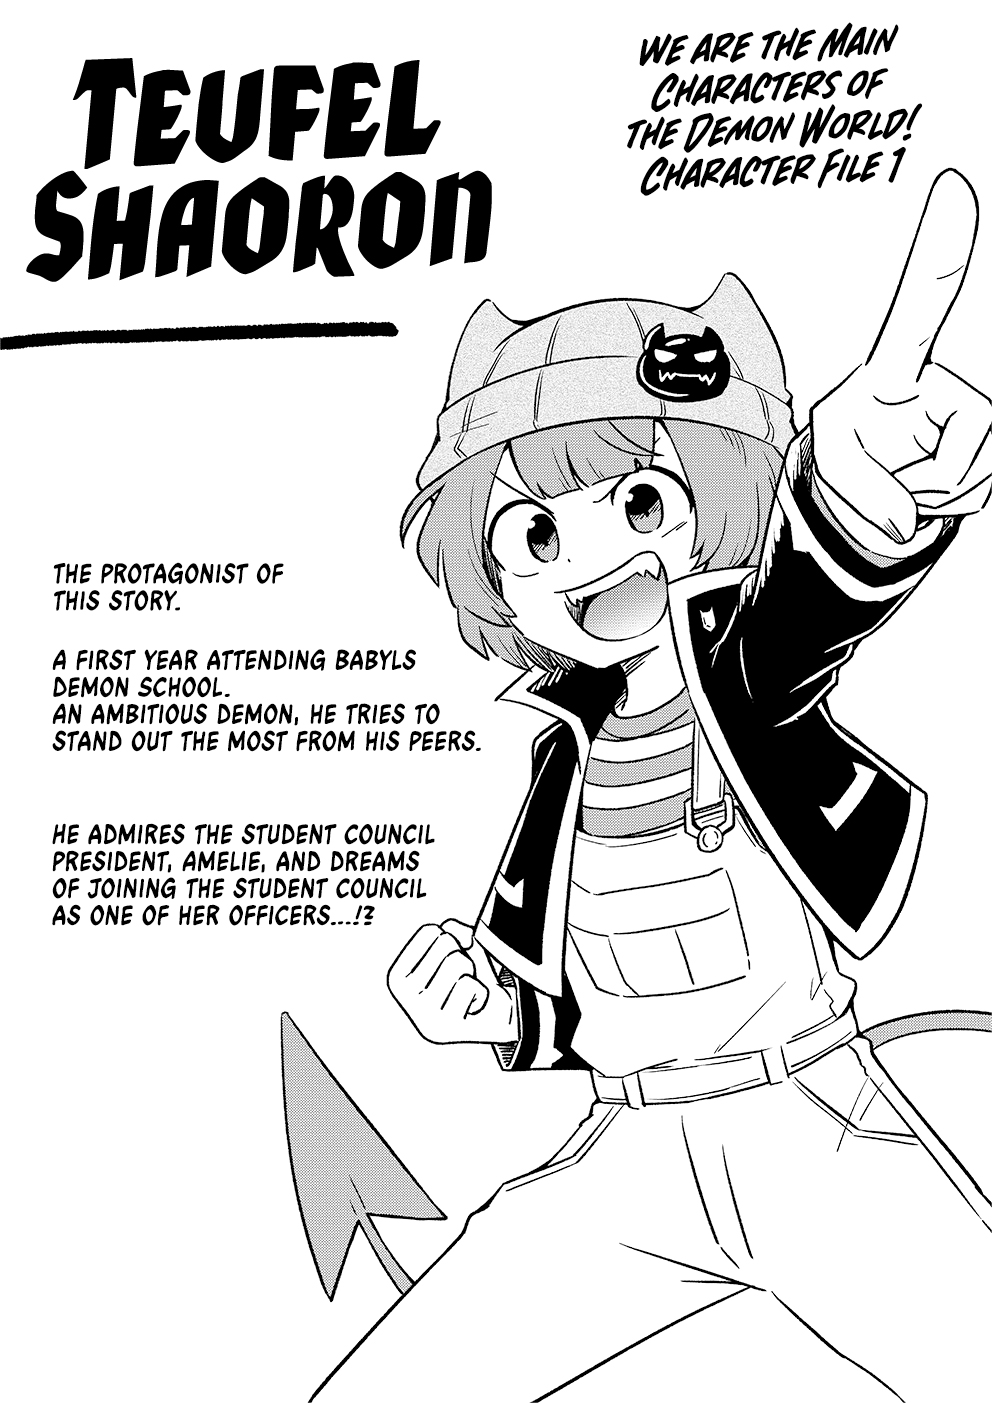 We Are The Main Characters Of The Demon World! Vol.2 Chapter 20.1: Character Sheets. - Picture 1